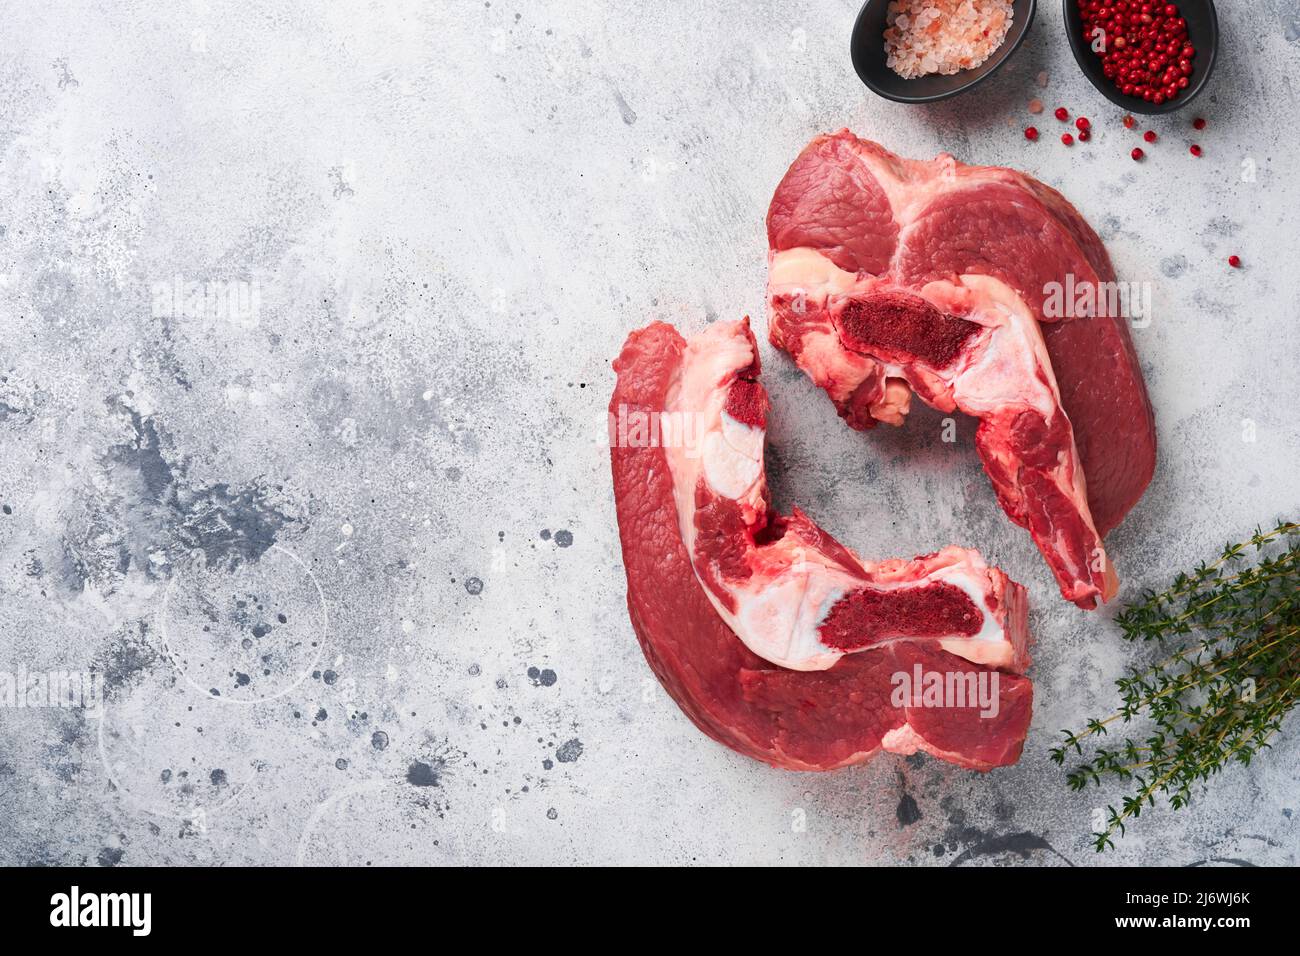 Raw beef meat. Rough piece of meat on bone for roast or soup with salt, pepper, thyme and rosemary on old grey concrete table background. Entrecote. R Stock Photo